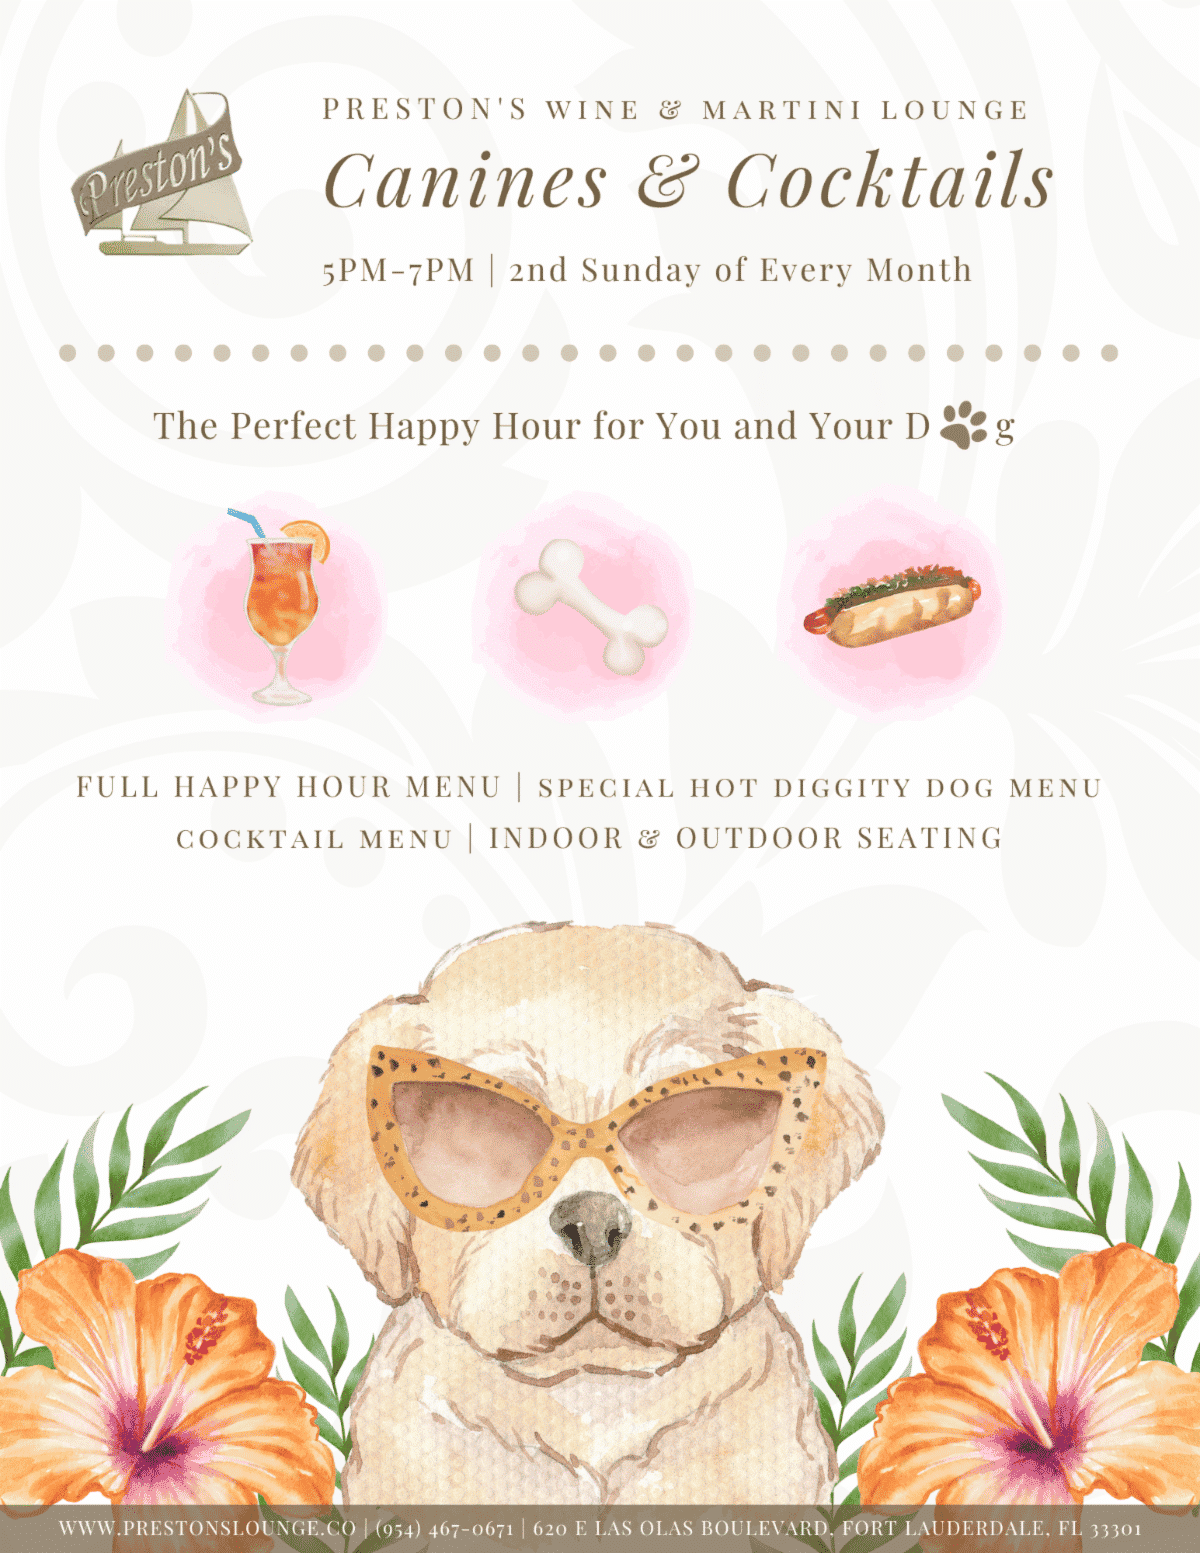 Canines & Cocktails is Back at Preston's Wine & Martini Lounge | 5PM-7PM | Every 2nd Sunday of every month!